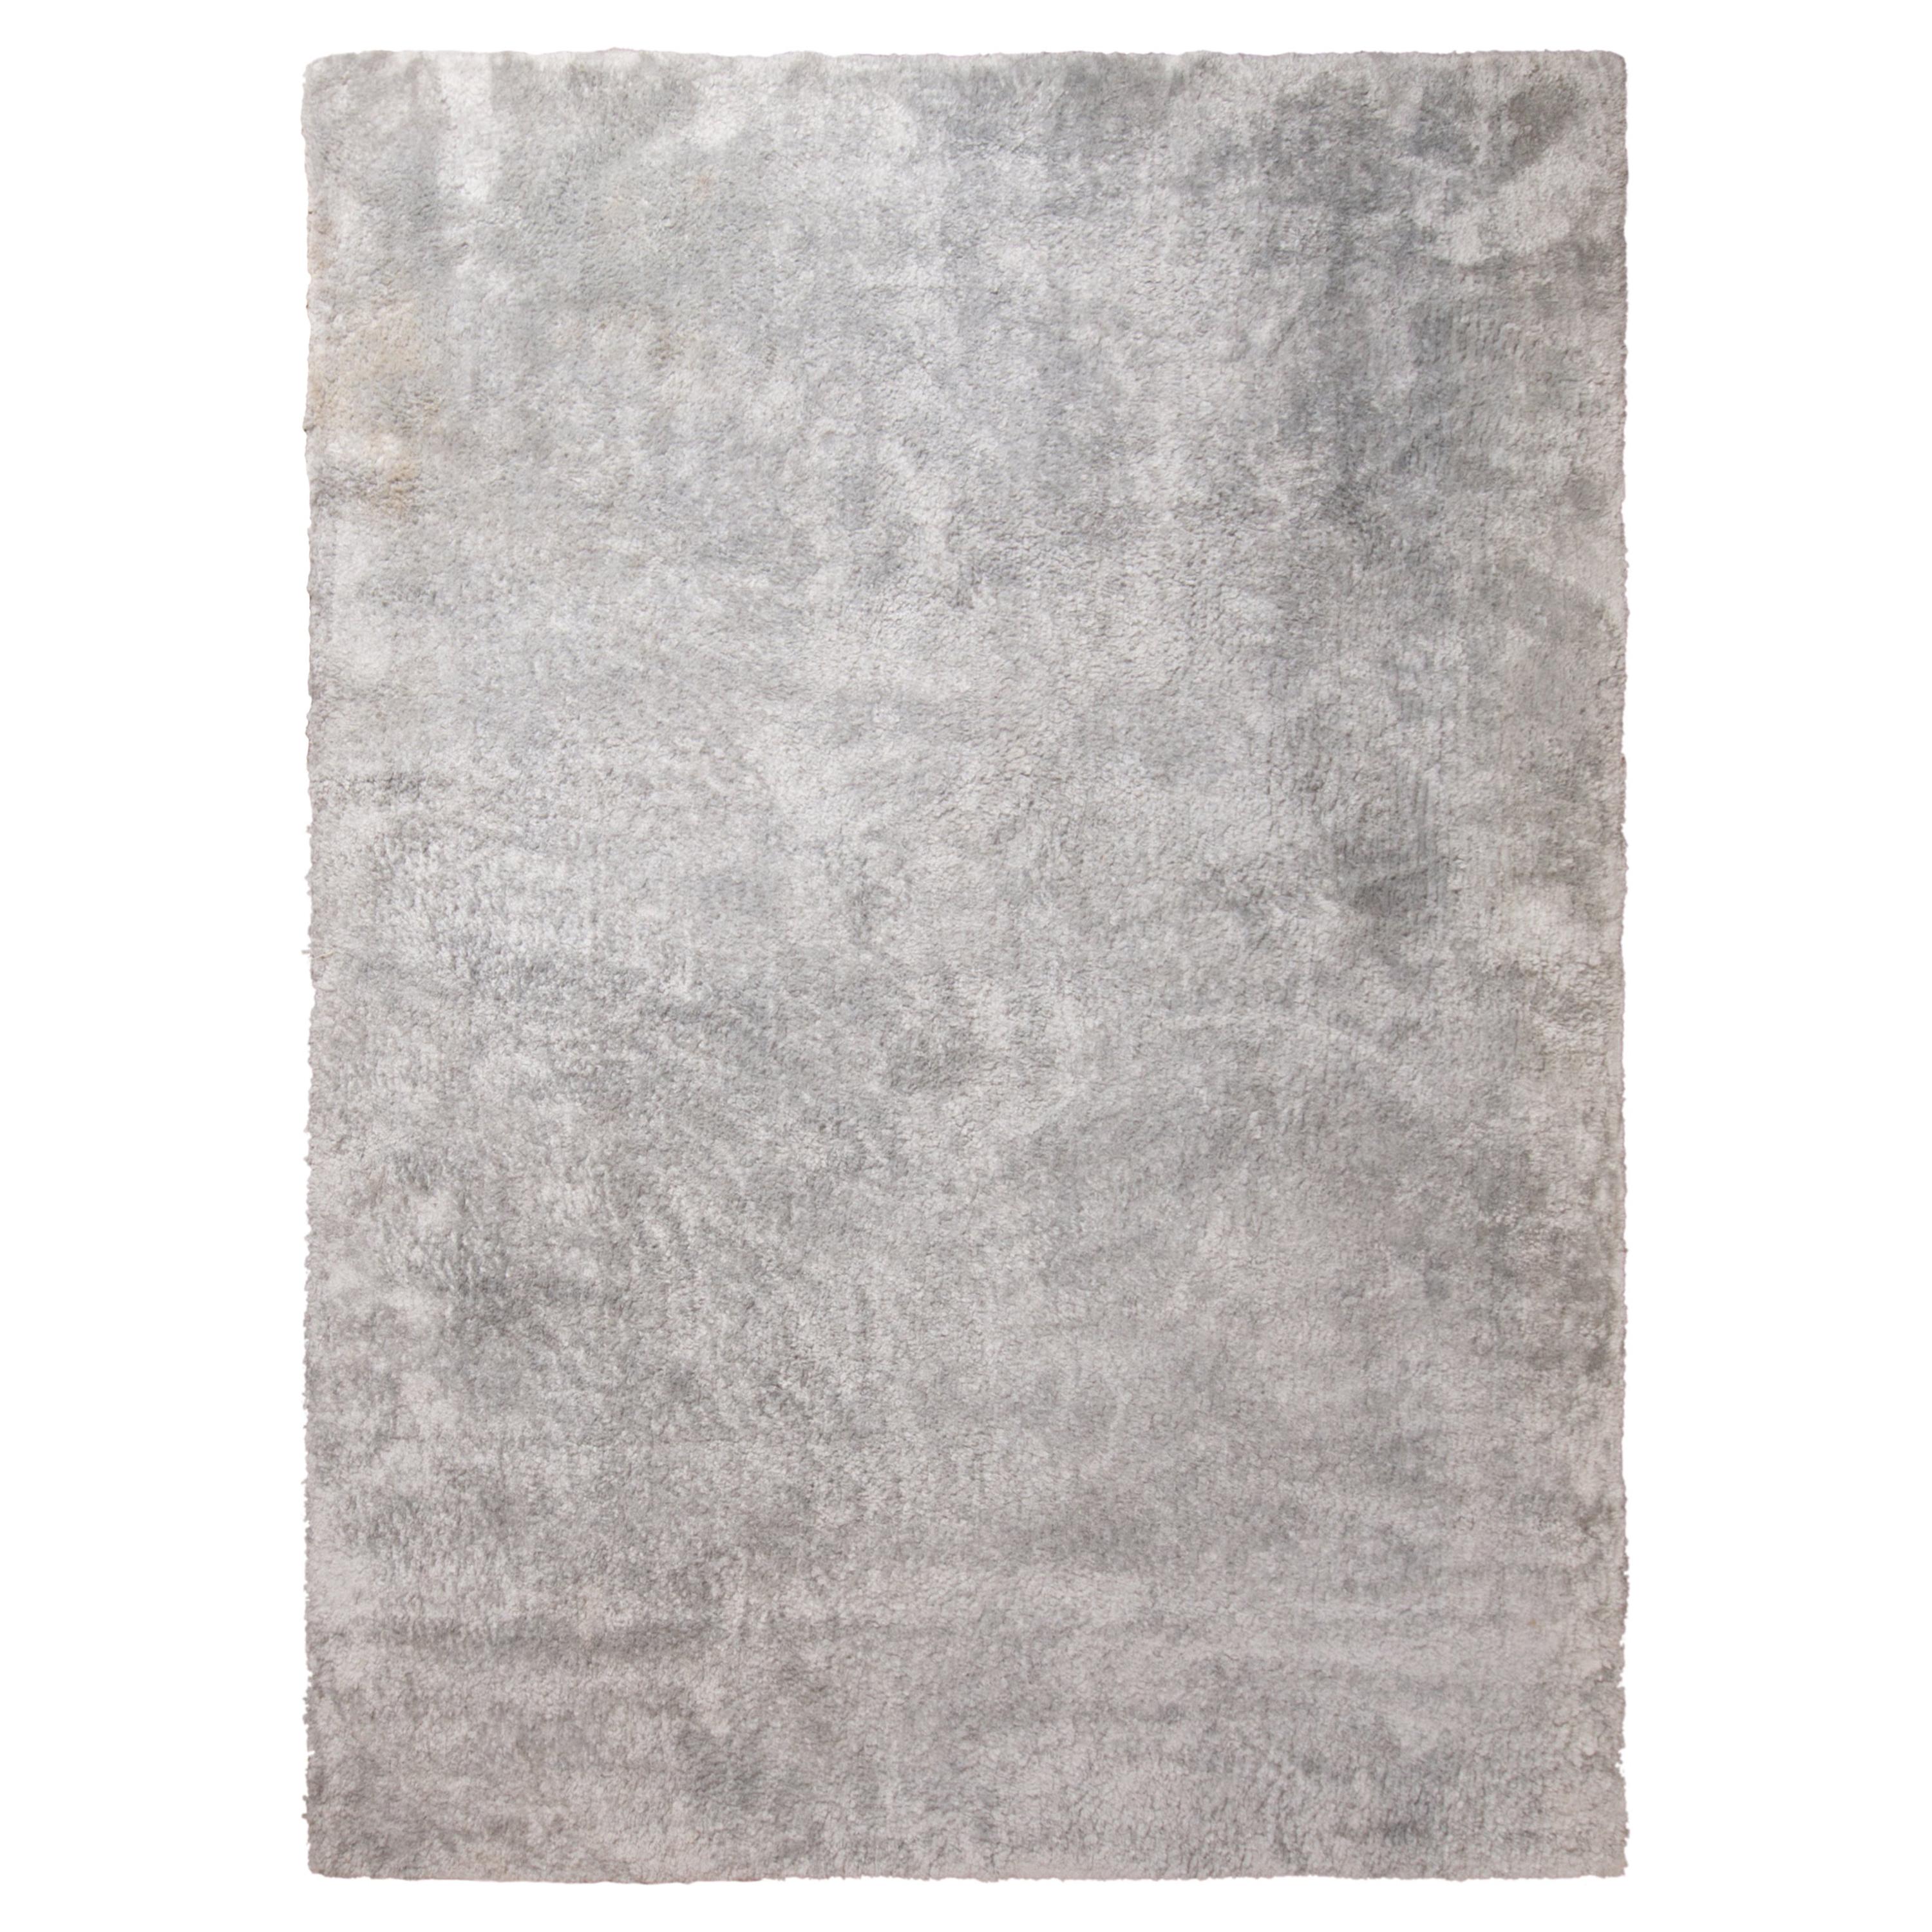 Rug & Kilim’s Textural Plain Rug in Gray/Silver Two Tones, High Pile